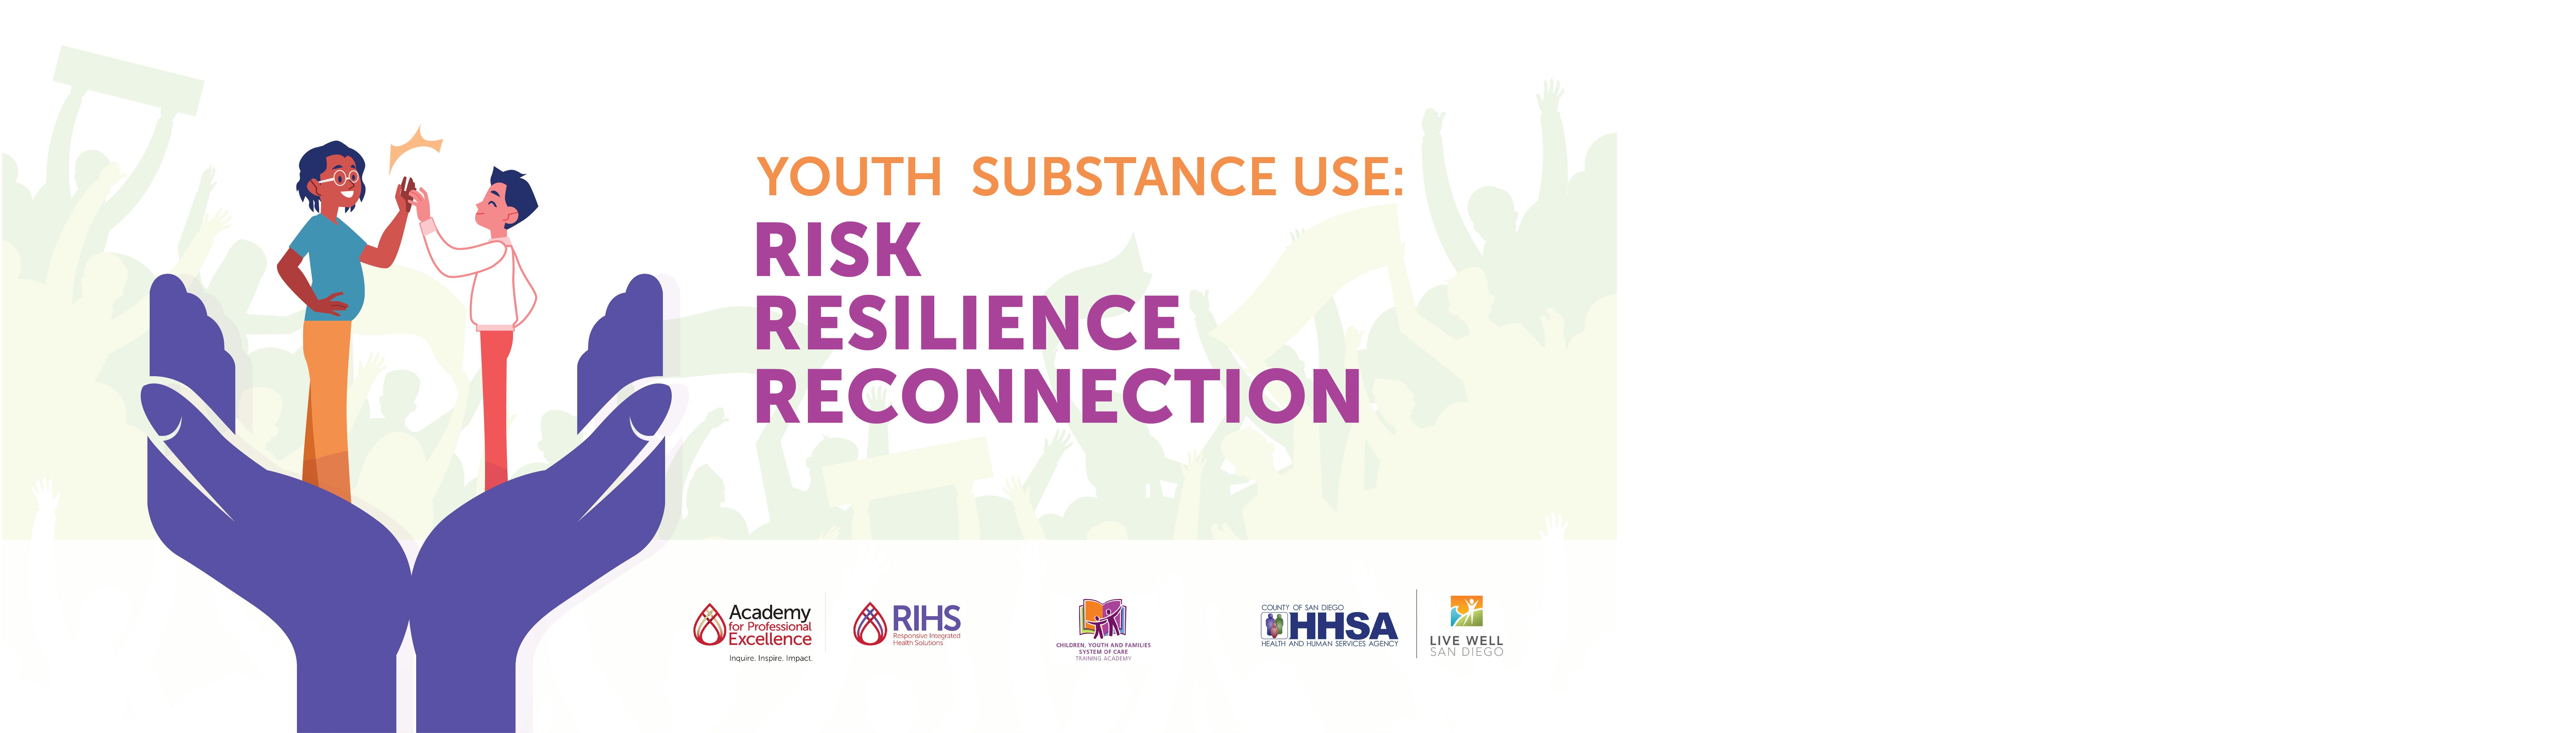 Youth Substance Use: Risk, Resilience, Reconnection 